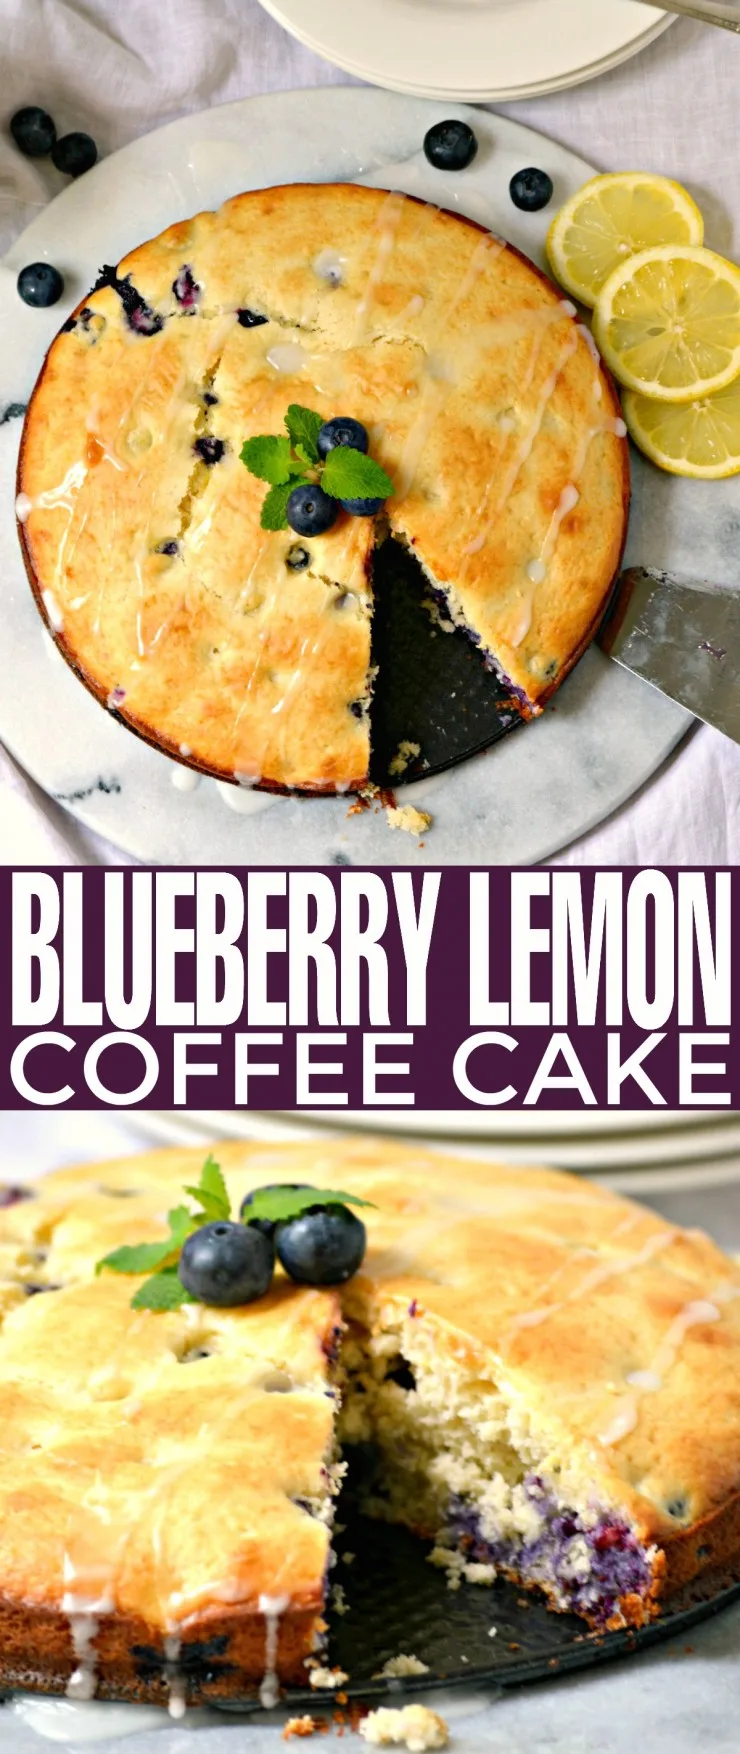 This Blueberry Lemon Coffee Cake recipe is loaded with flavour - it's a dessert everyone just loves to sit down and eat with a mug of hot coffee!